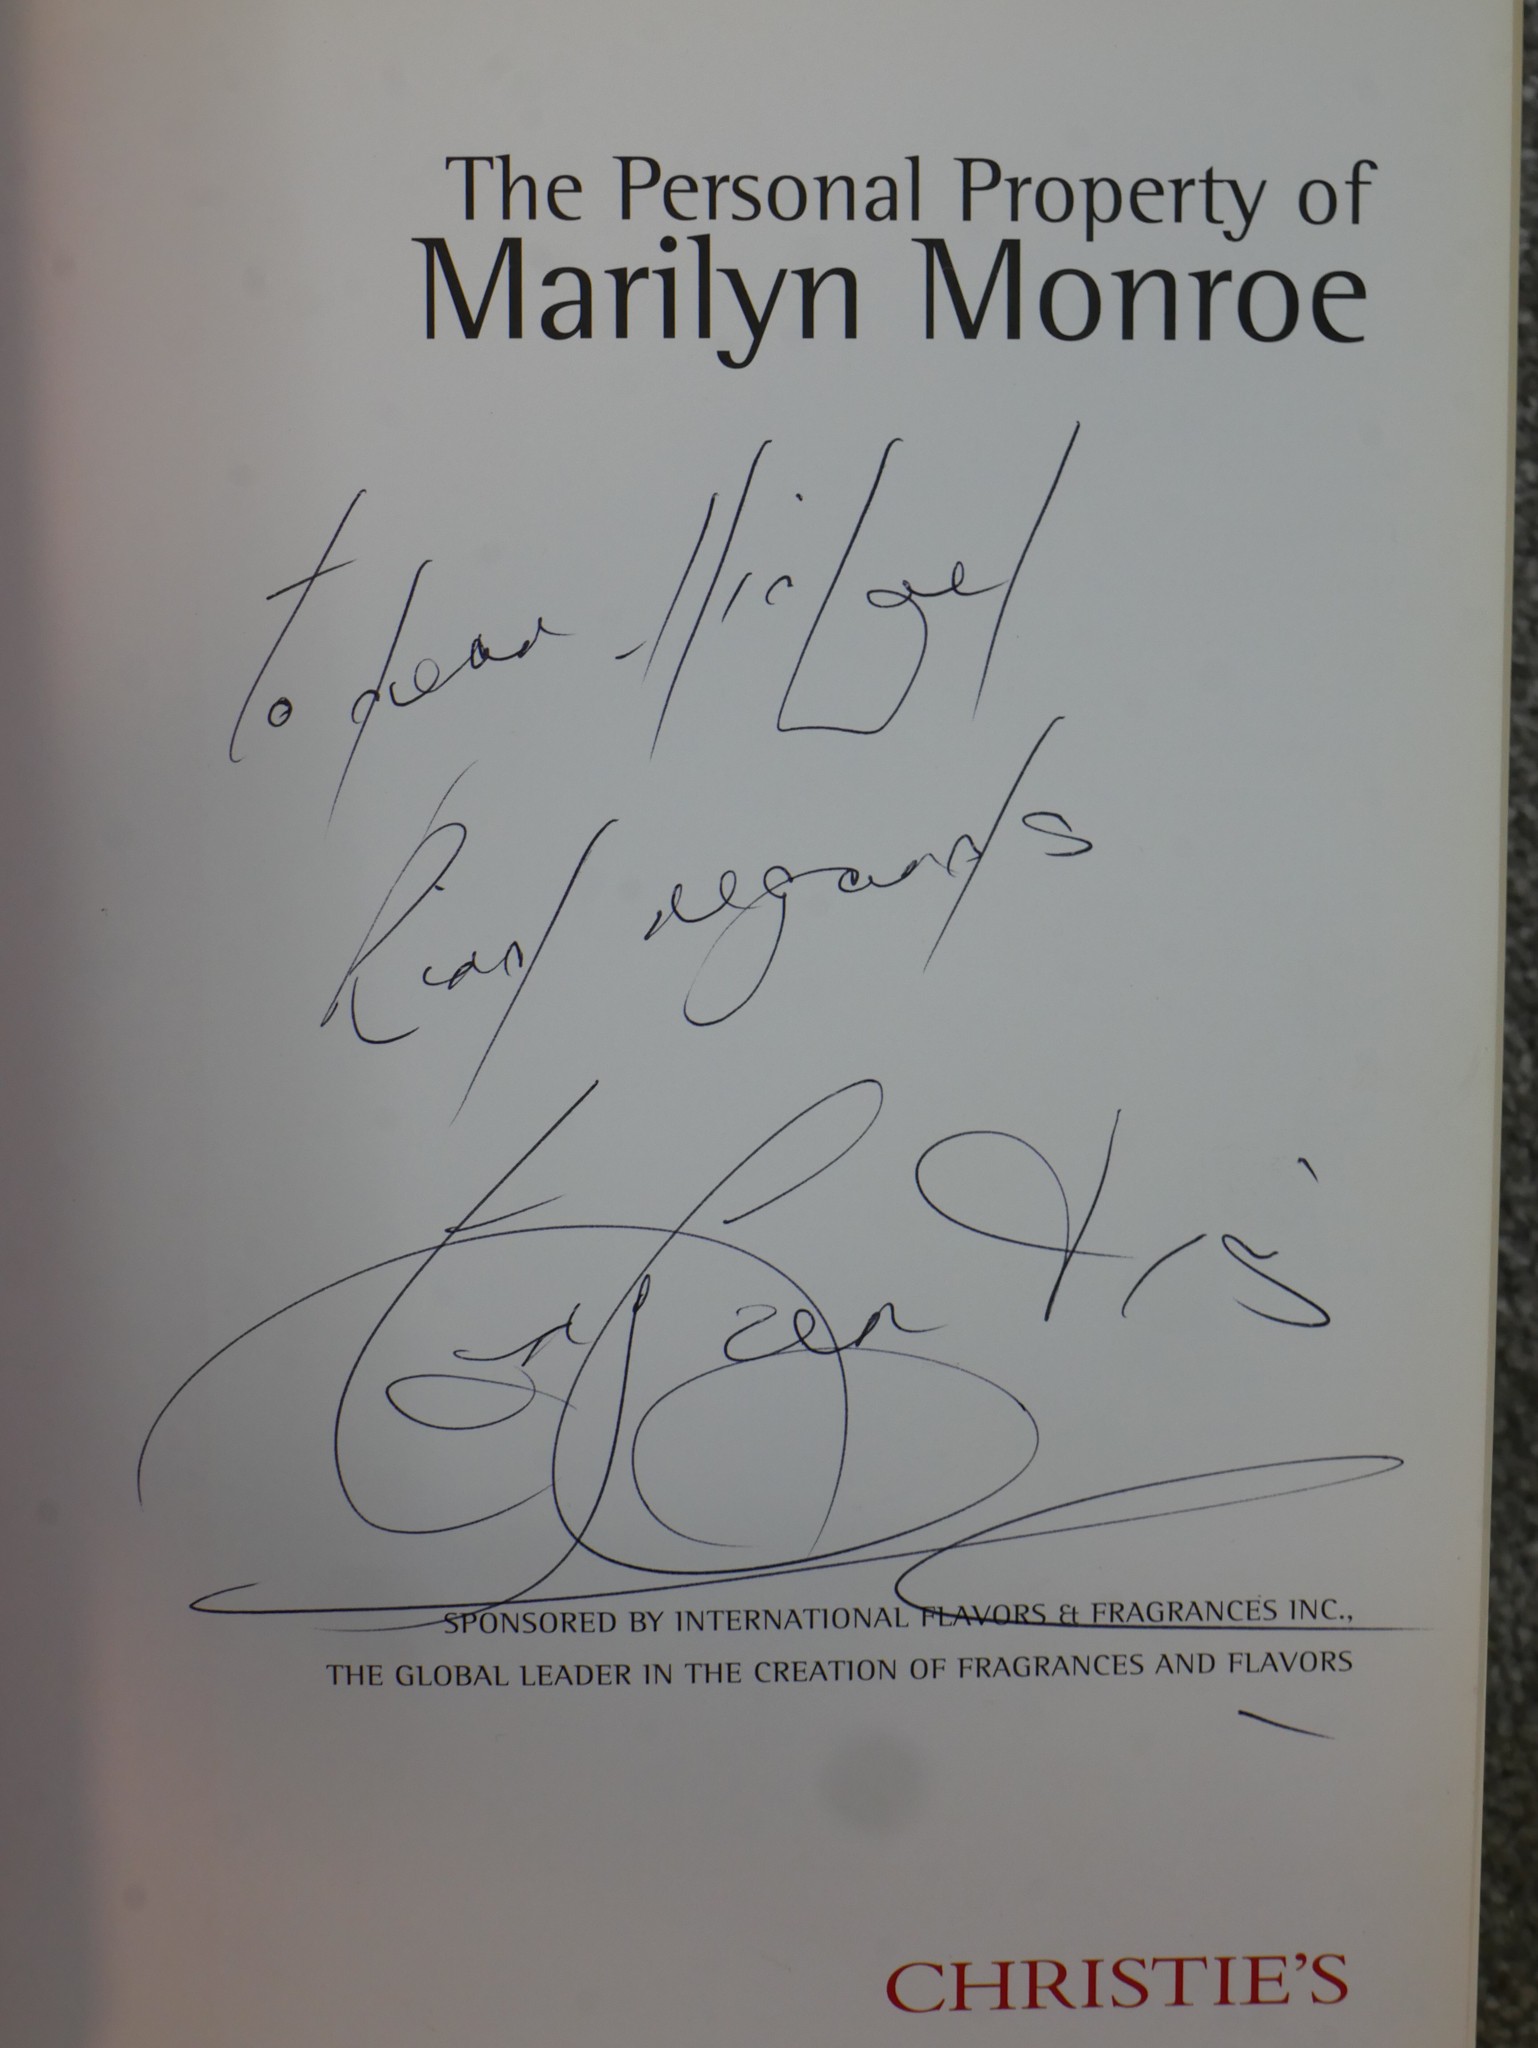 The Marilyn Monroe Collection Catalogue: The Personal Property of Marilyn Monroe held at Christies - Image 2 of 7